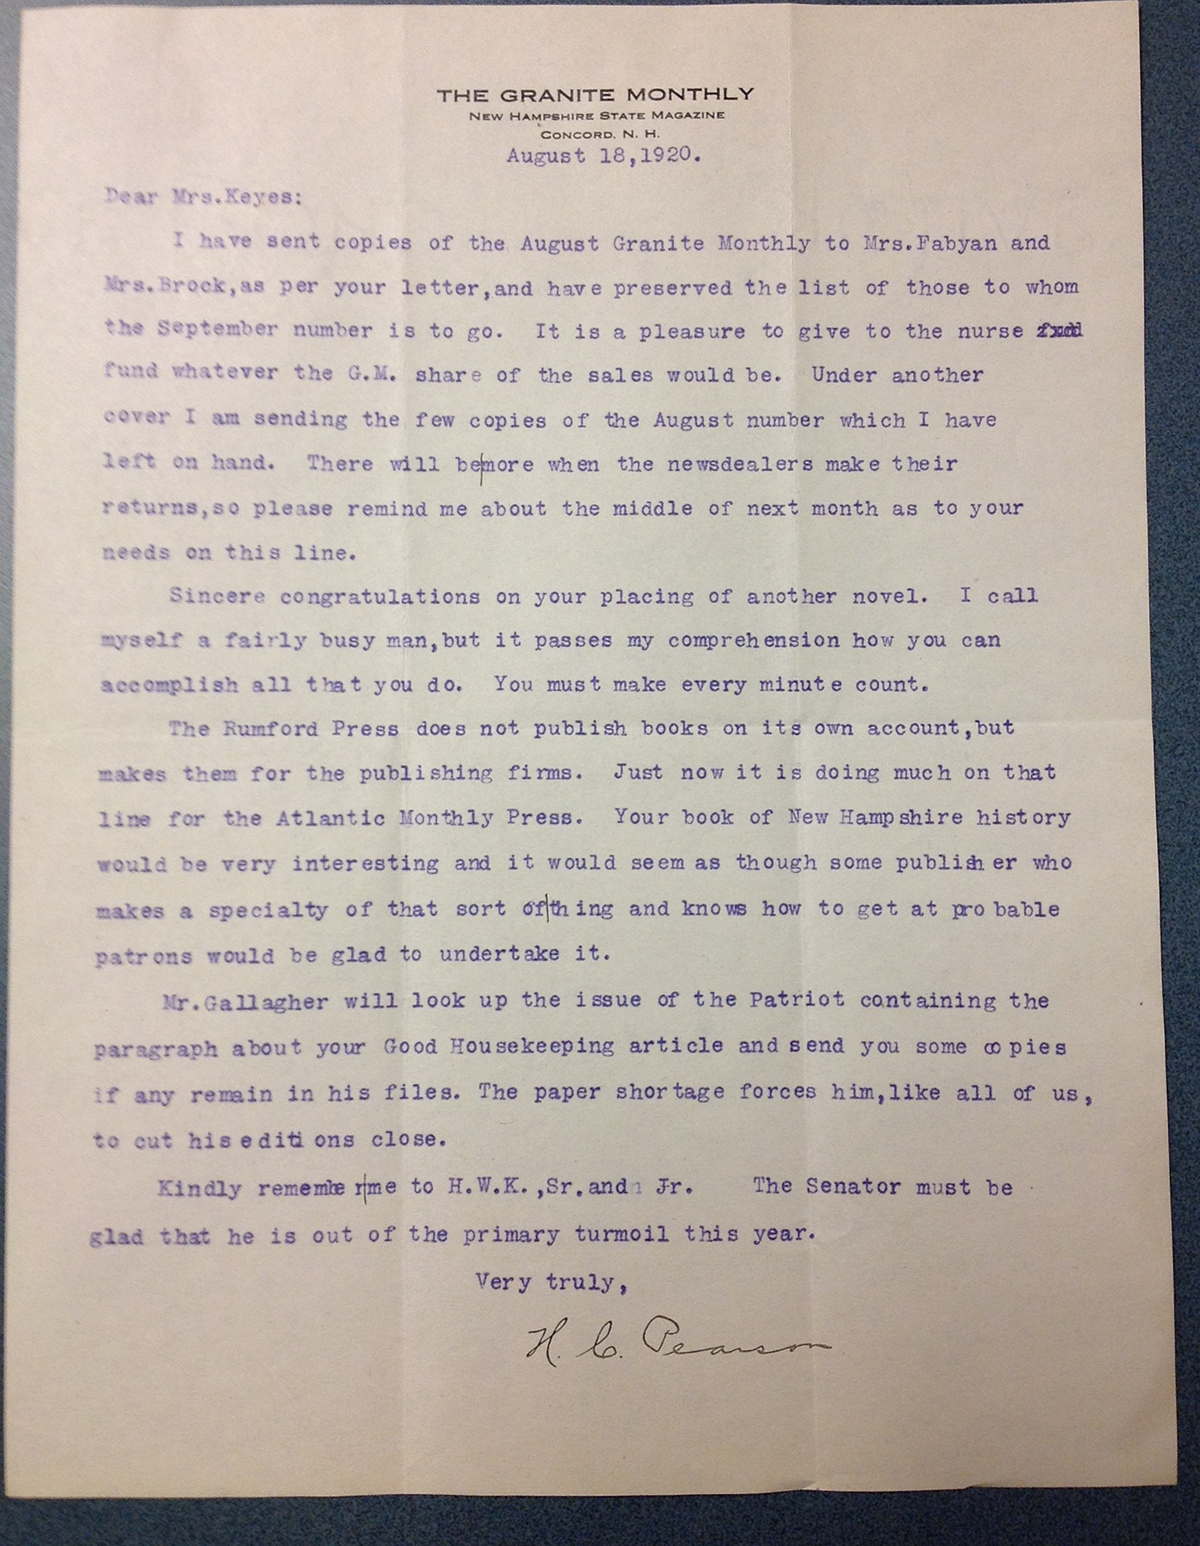 H.C. Pearson to FPK<br />
Letter, 1920 August 18